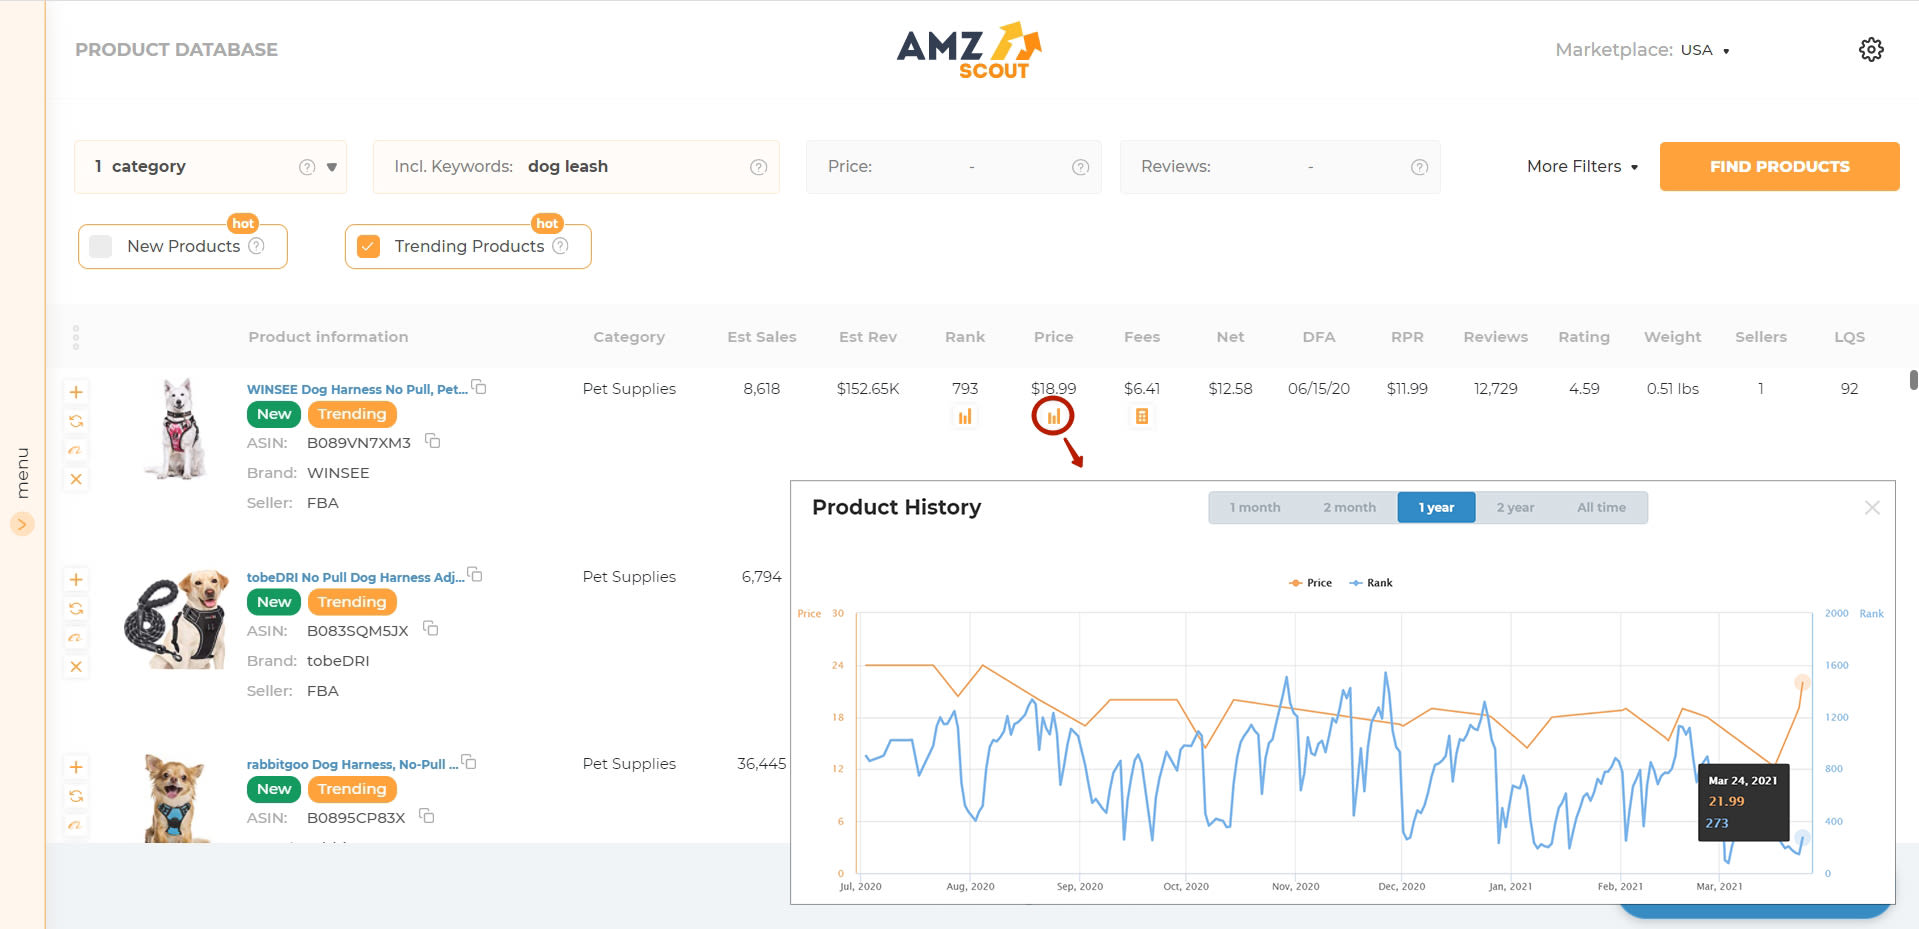 How to see Amazon price history with AMZSout